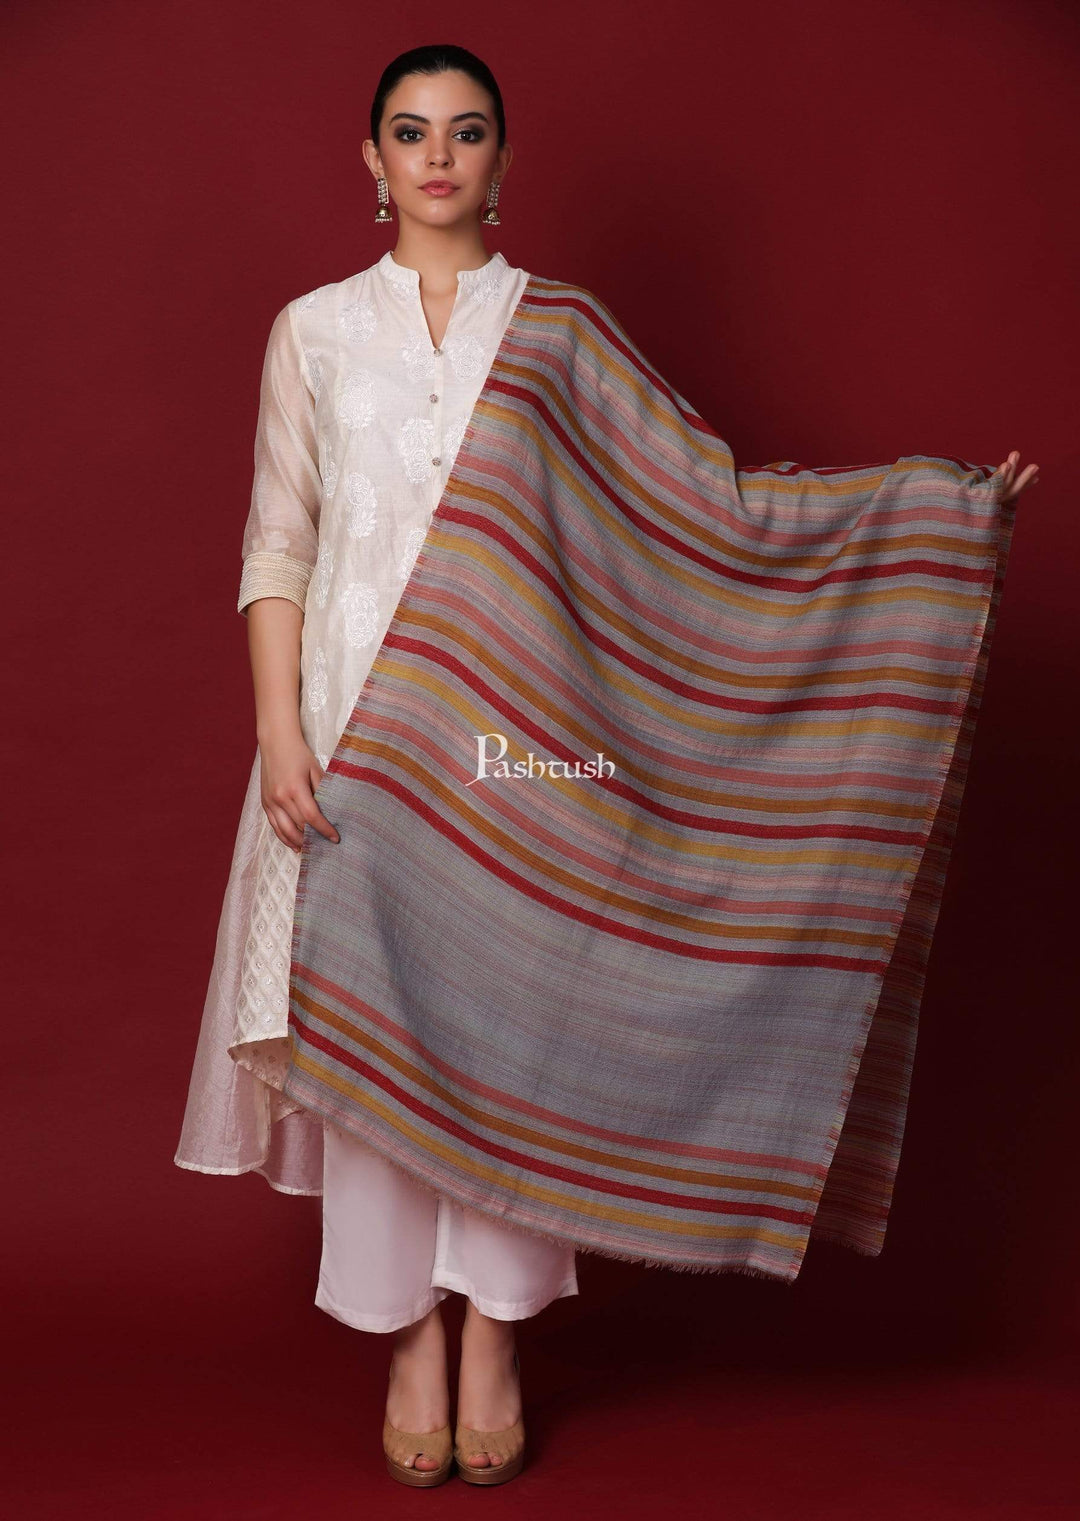 Pashtush Store Stole Pashtush Womens Cashmere and Wool Scarf, Sunkissed Hues